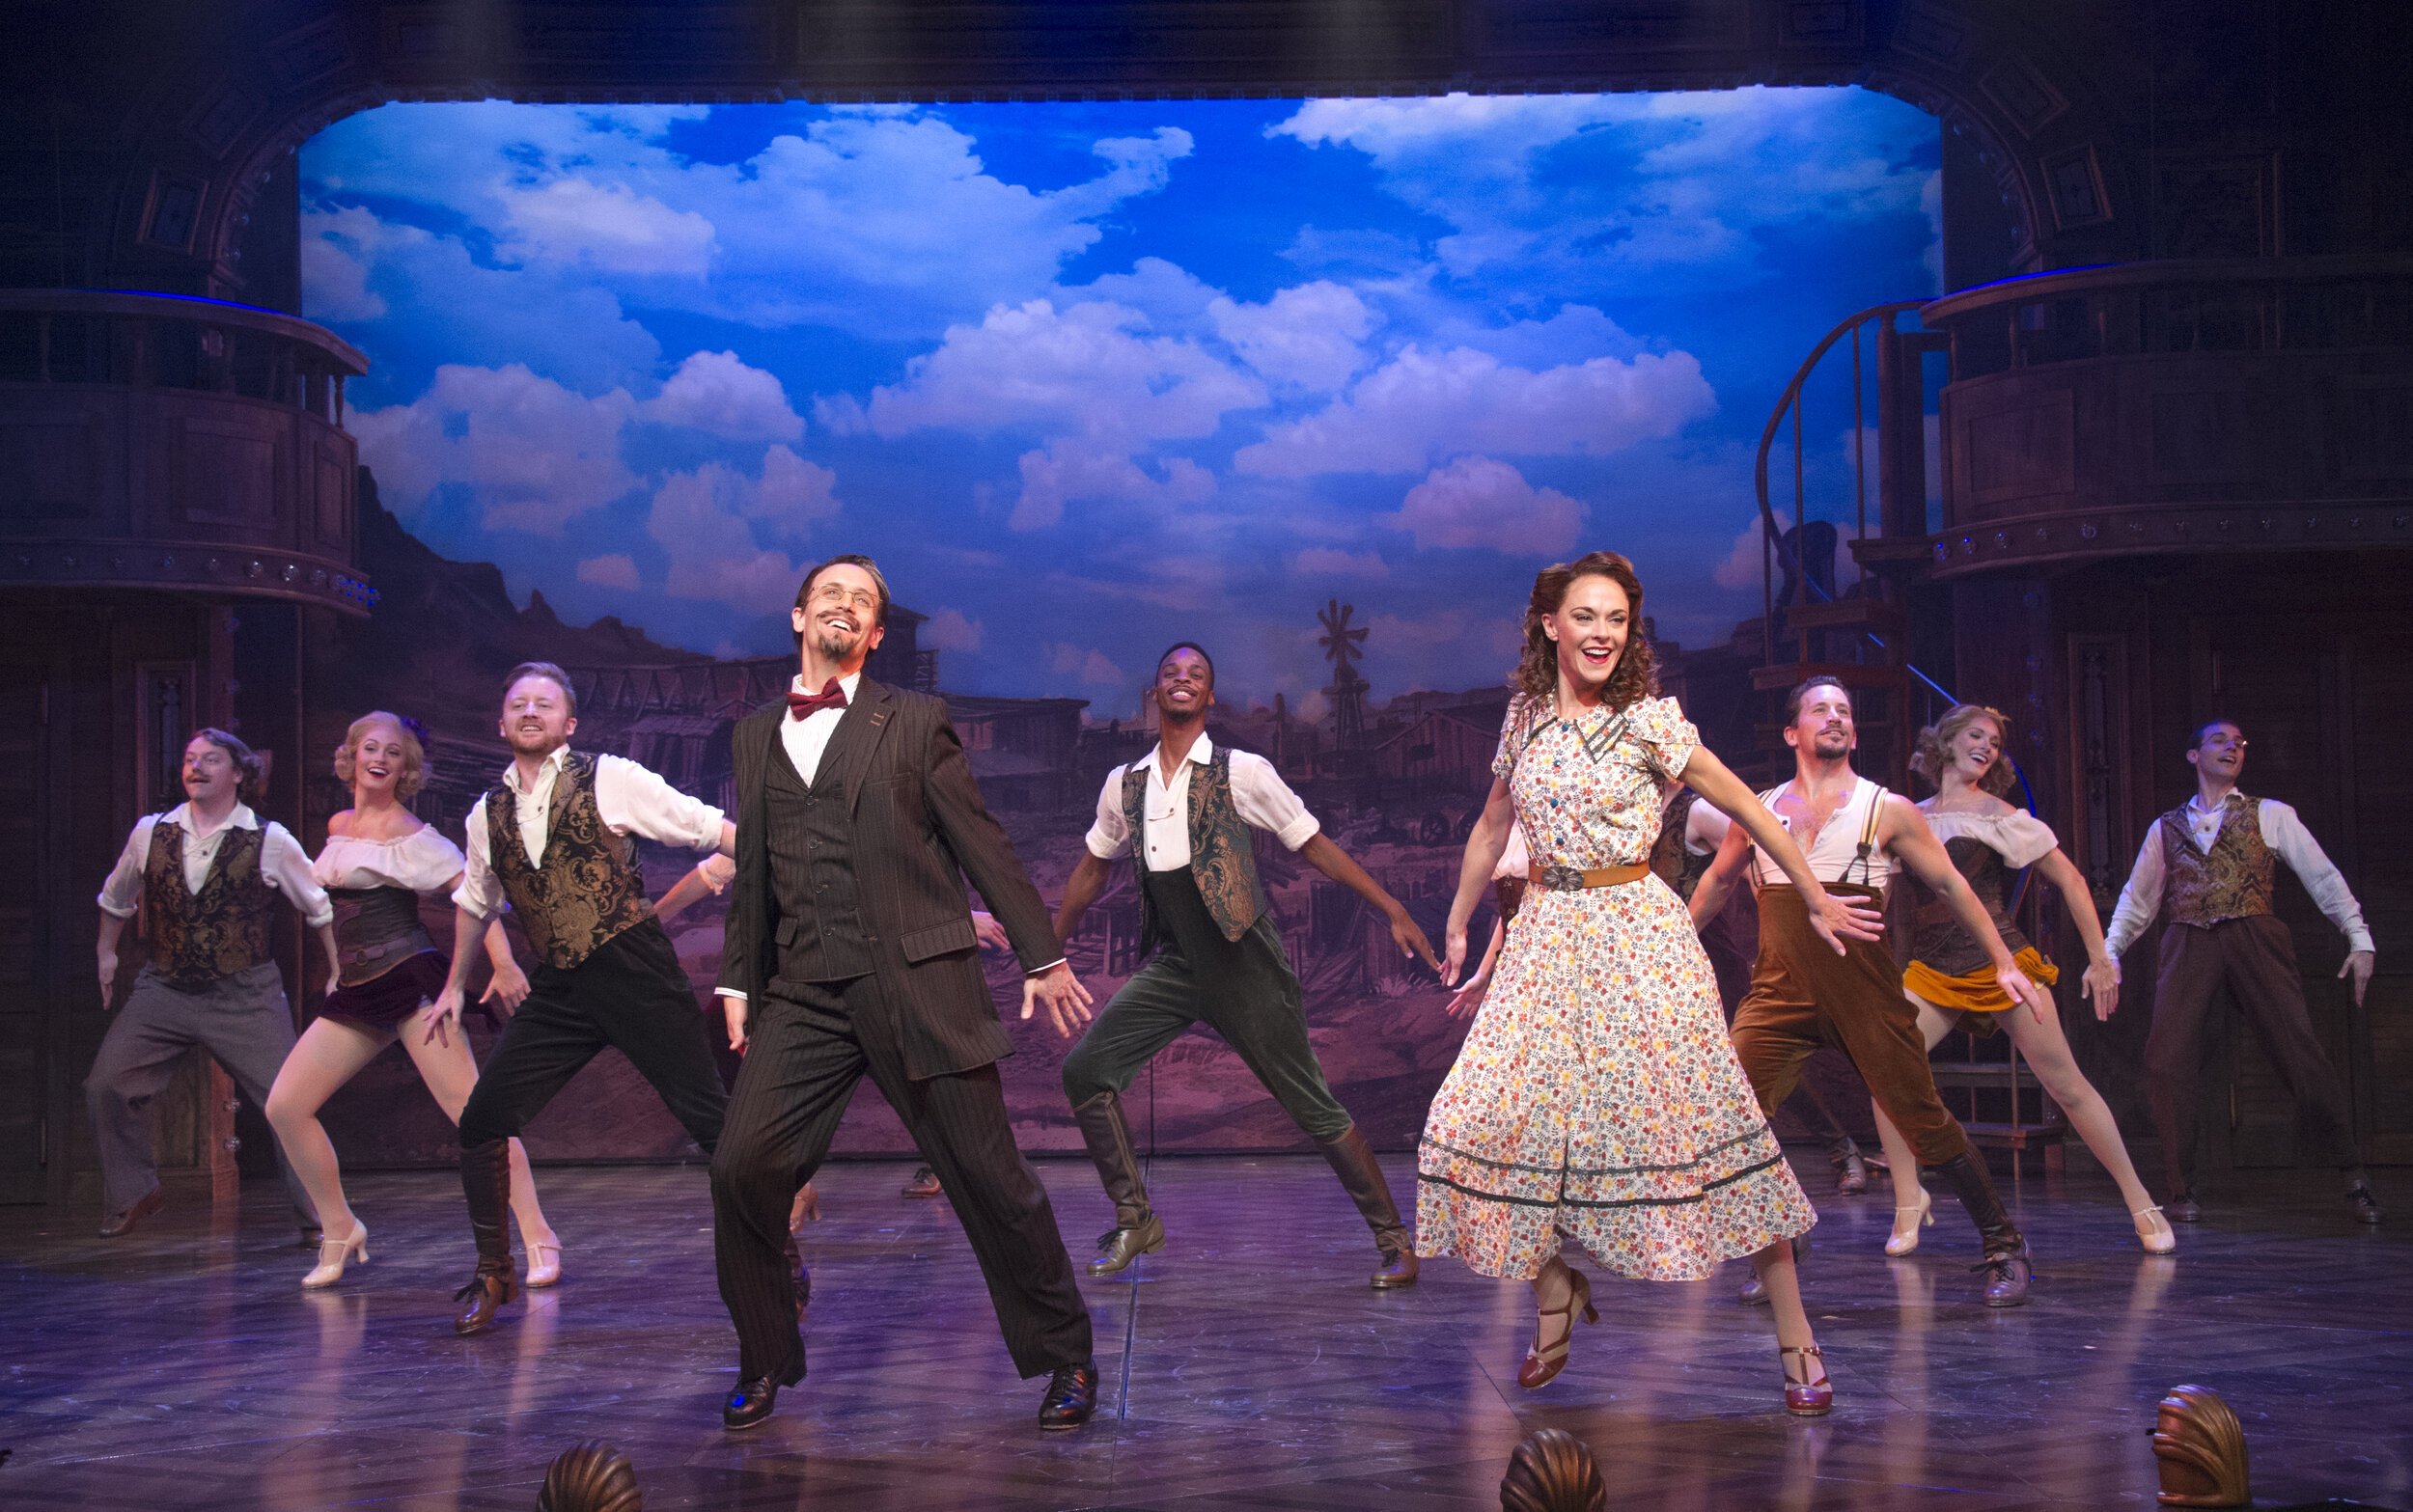  Danny Gardner as Bobby Child and Ashley Spencer as Polly Baker and the ensemble in  Crazy for You  at Signature Theatre. Photo: C. Stanley 